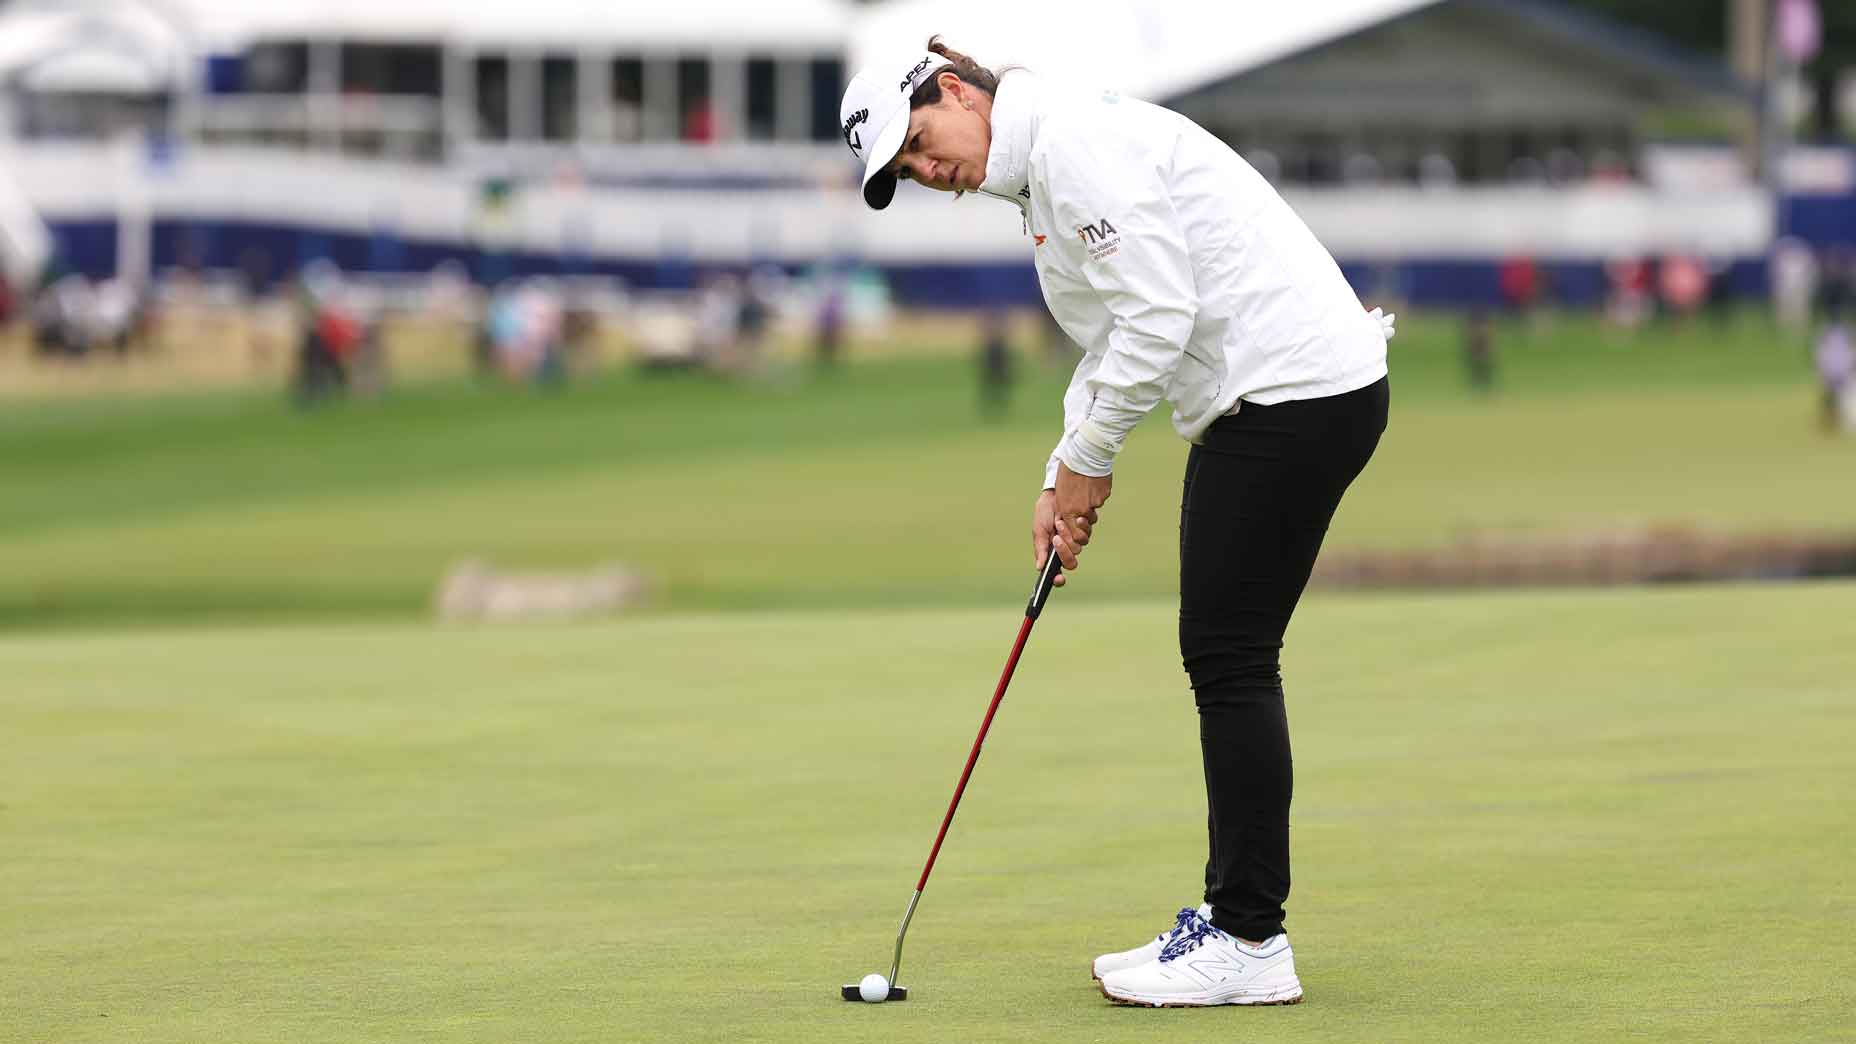 Emma Talley putts on the 18th hole during the first round of the KPMG Women's PGA Championship at Baltusrol Golf Club on Thursday, June 22, 2023 in Springfield, New Jersey.